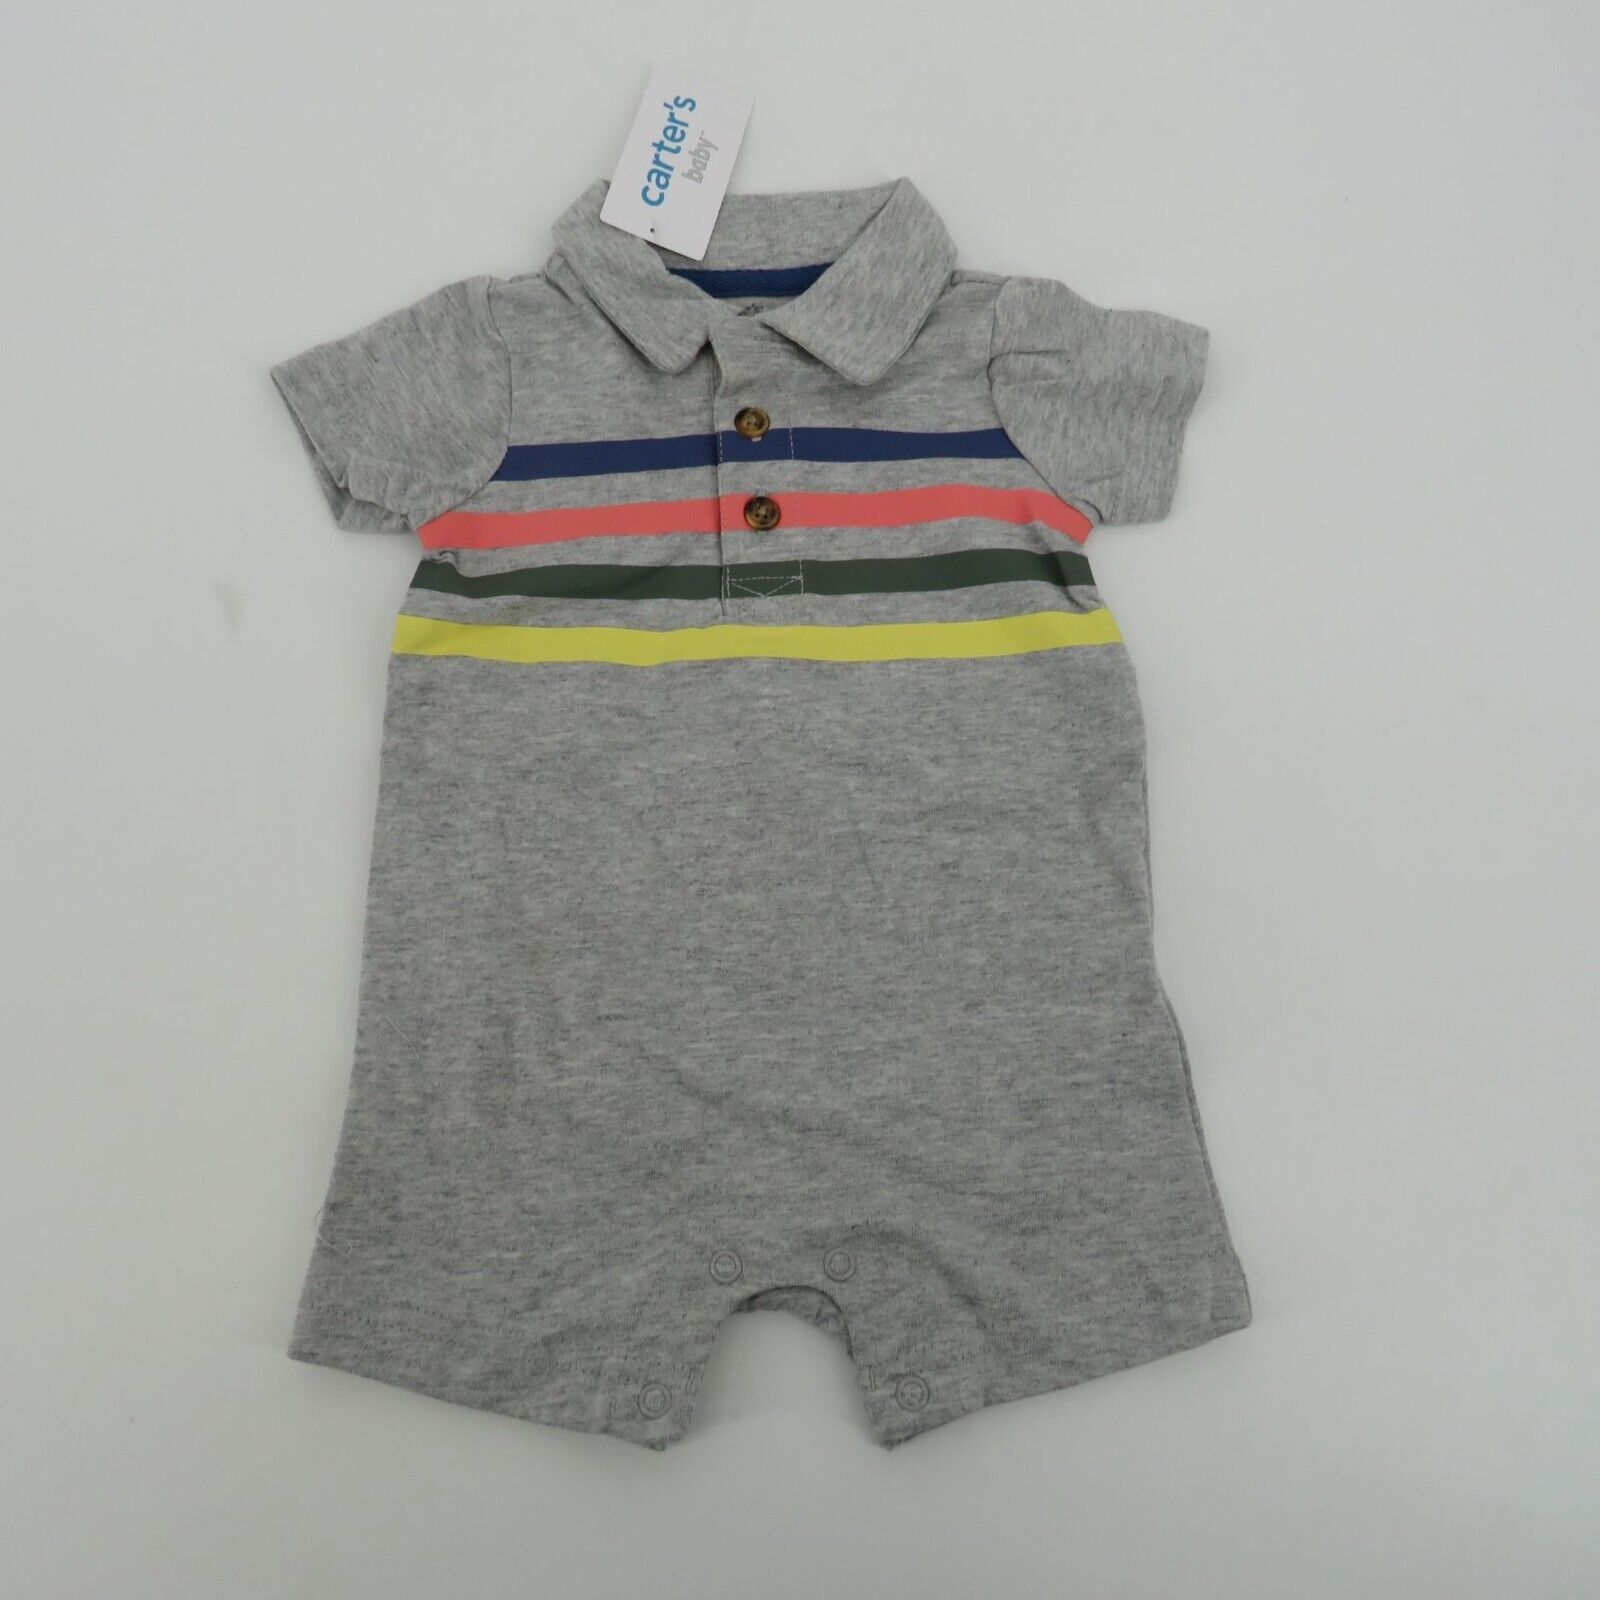 Primary image for Carter's One Piece Polo Collar Short Sleeved Romper Playsuit 9M NWT $18